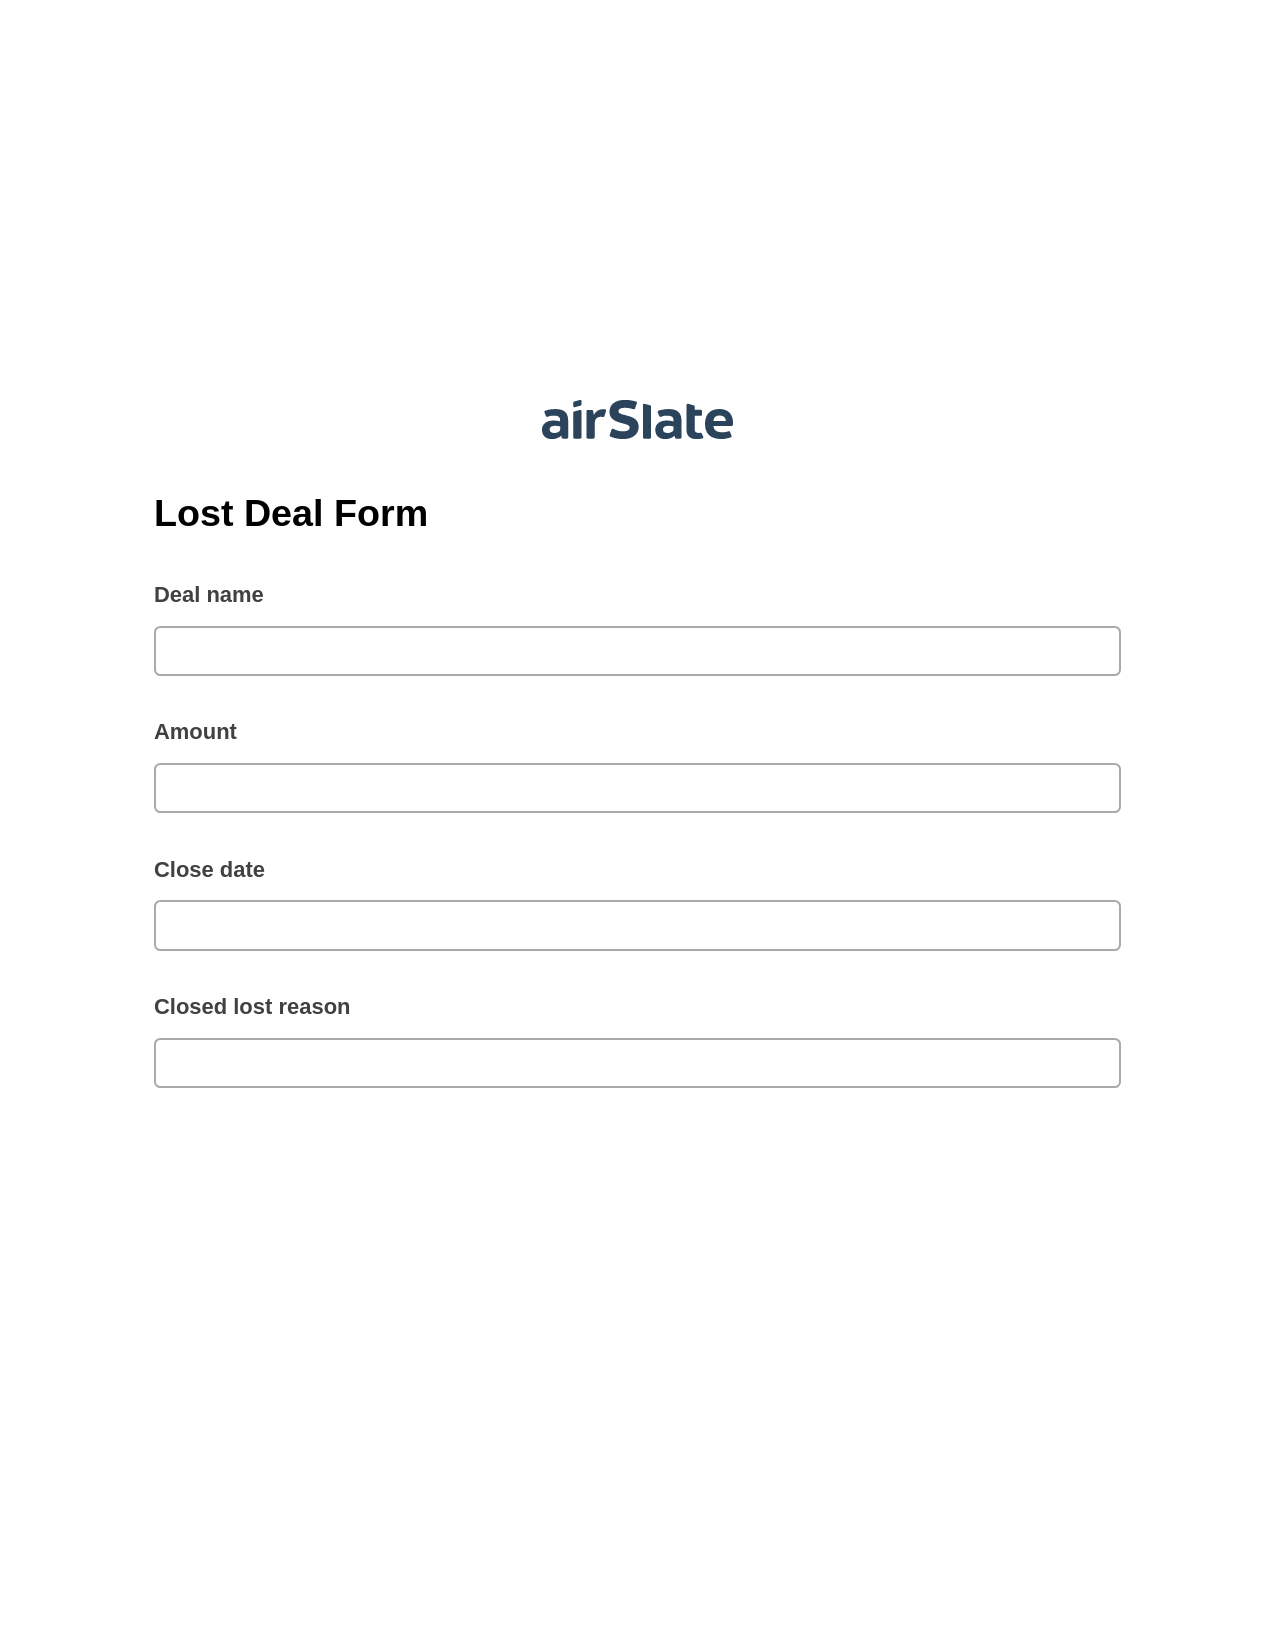 Lost Deal Form Pre-fill Dropdowns from Airtable, SendGrid send Campaign bot, Archive to Dropbox Bot